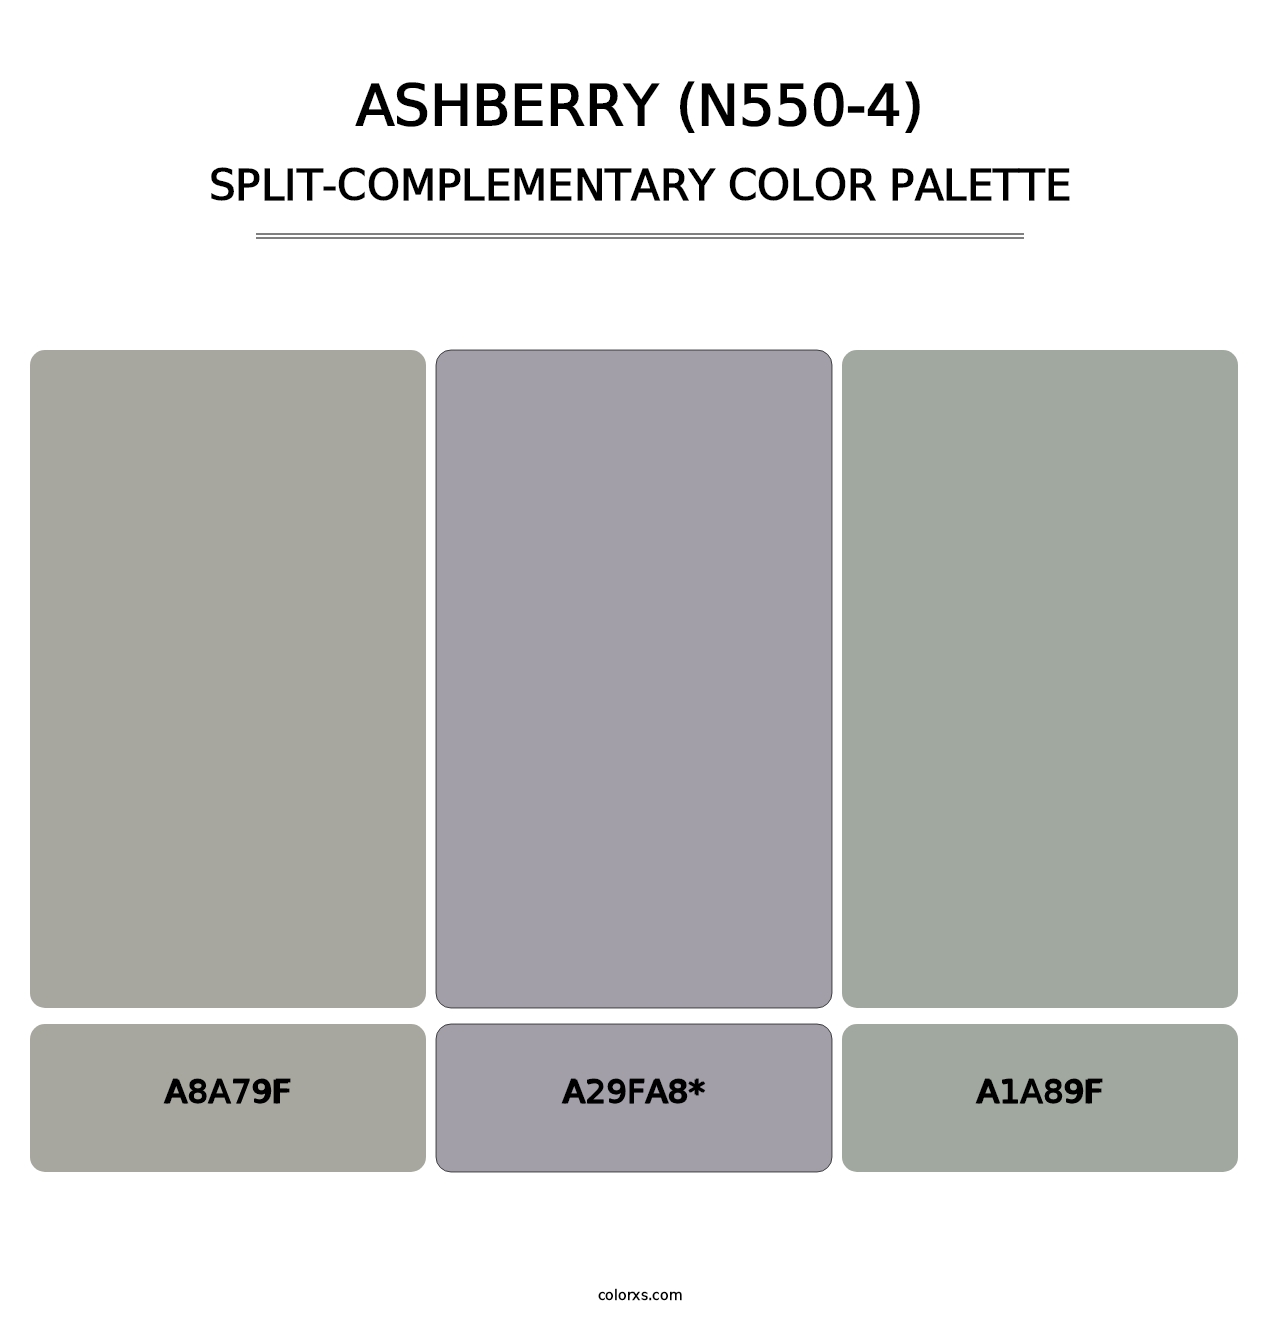 Ashberry (N550-4) - Split-Complementary Color Palette